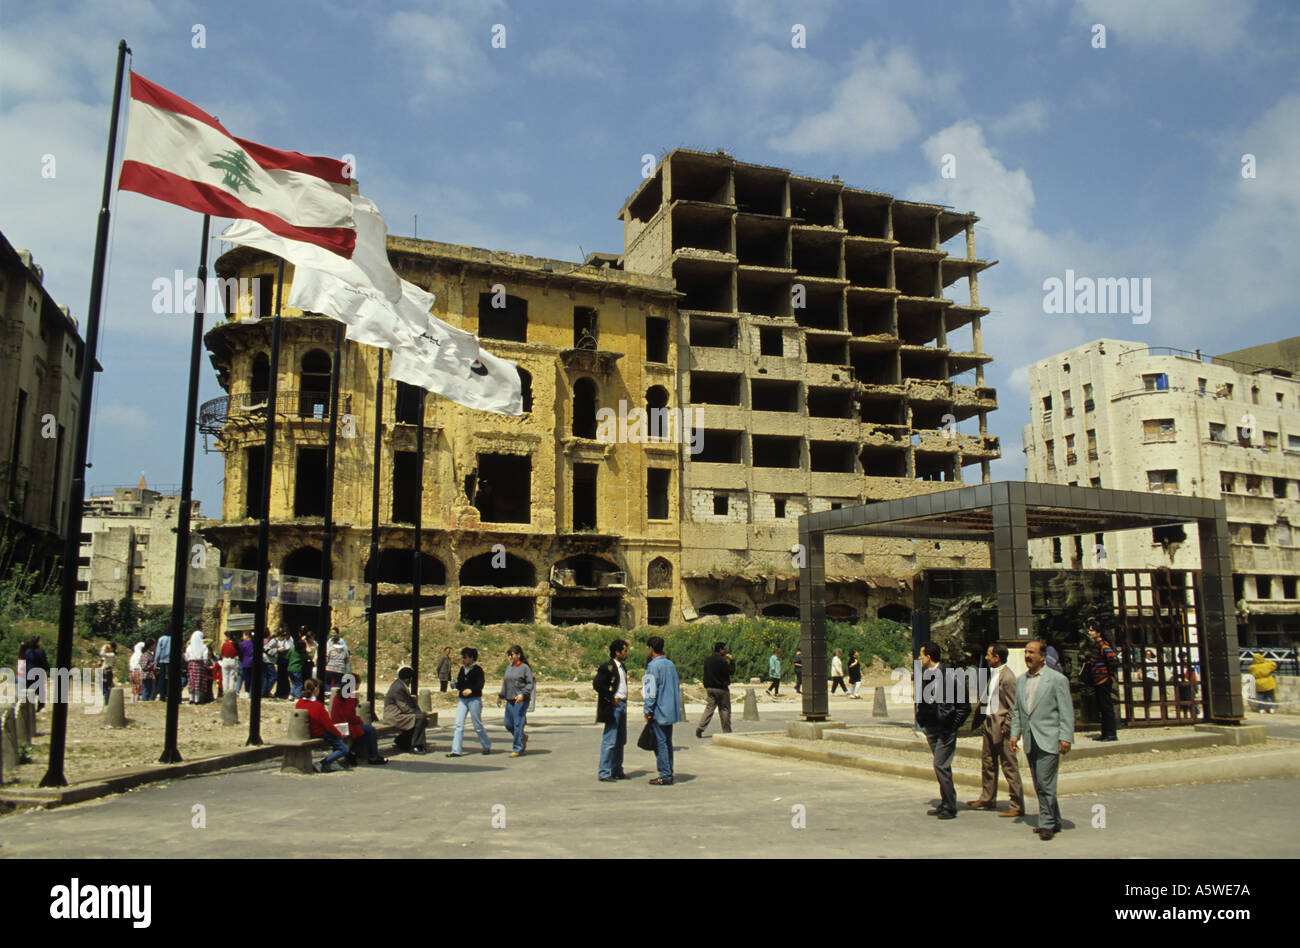 People visiting the Project of Reconstruction in Beirut, Lebanon. Stock Photo